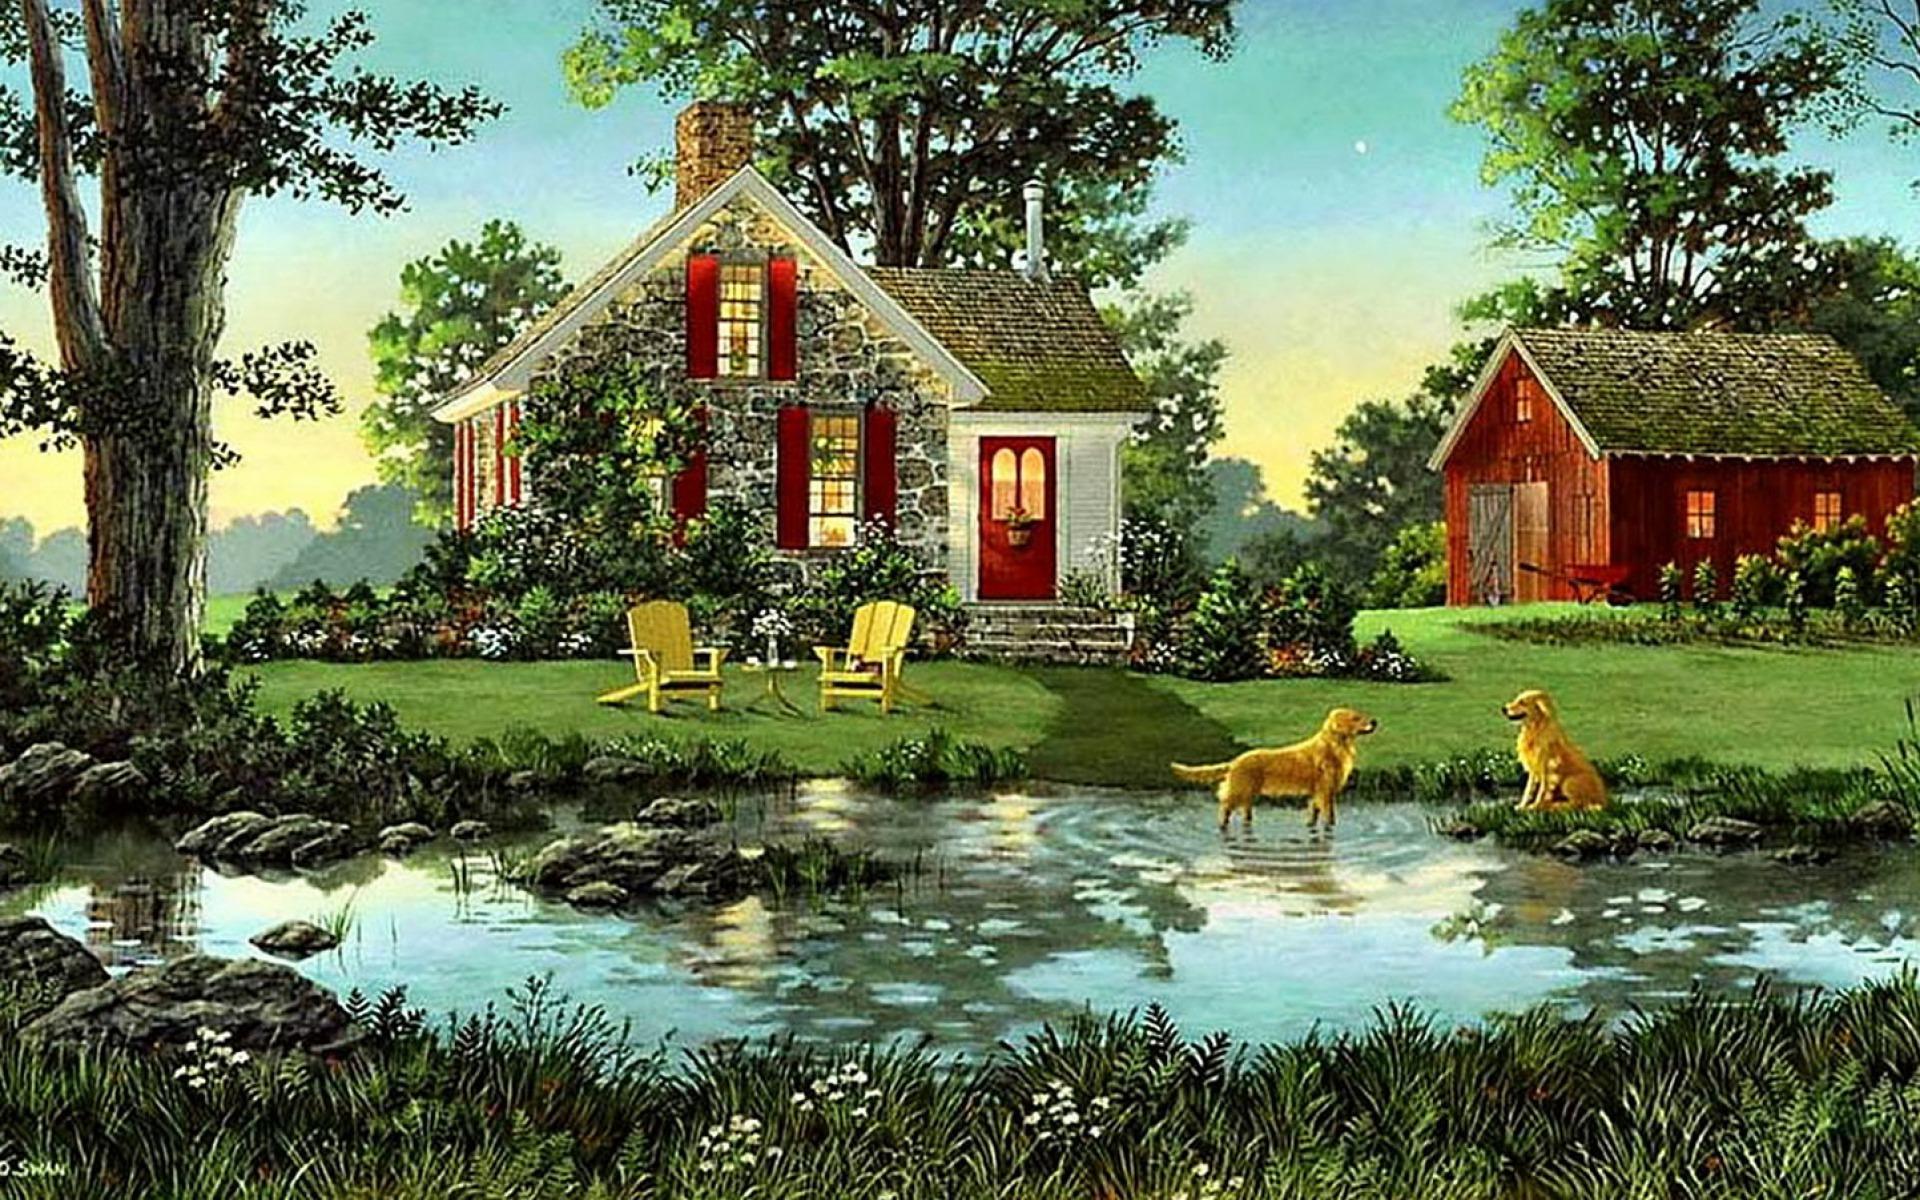 House Shed Dogs Pond Nature wallpaper. House Shed Dogs Pond Nature